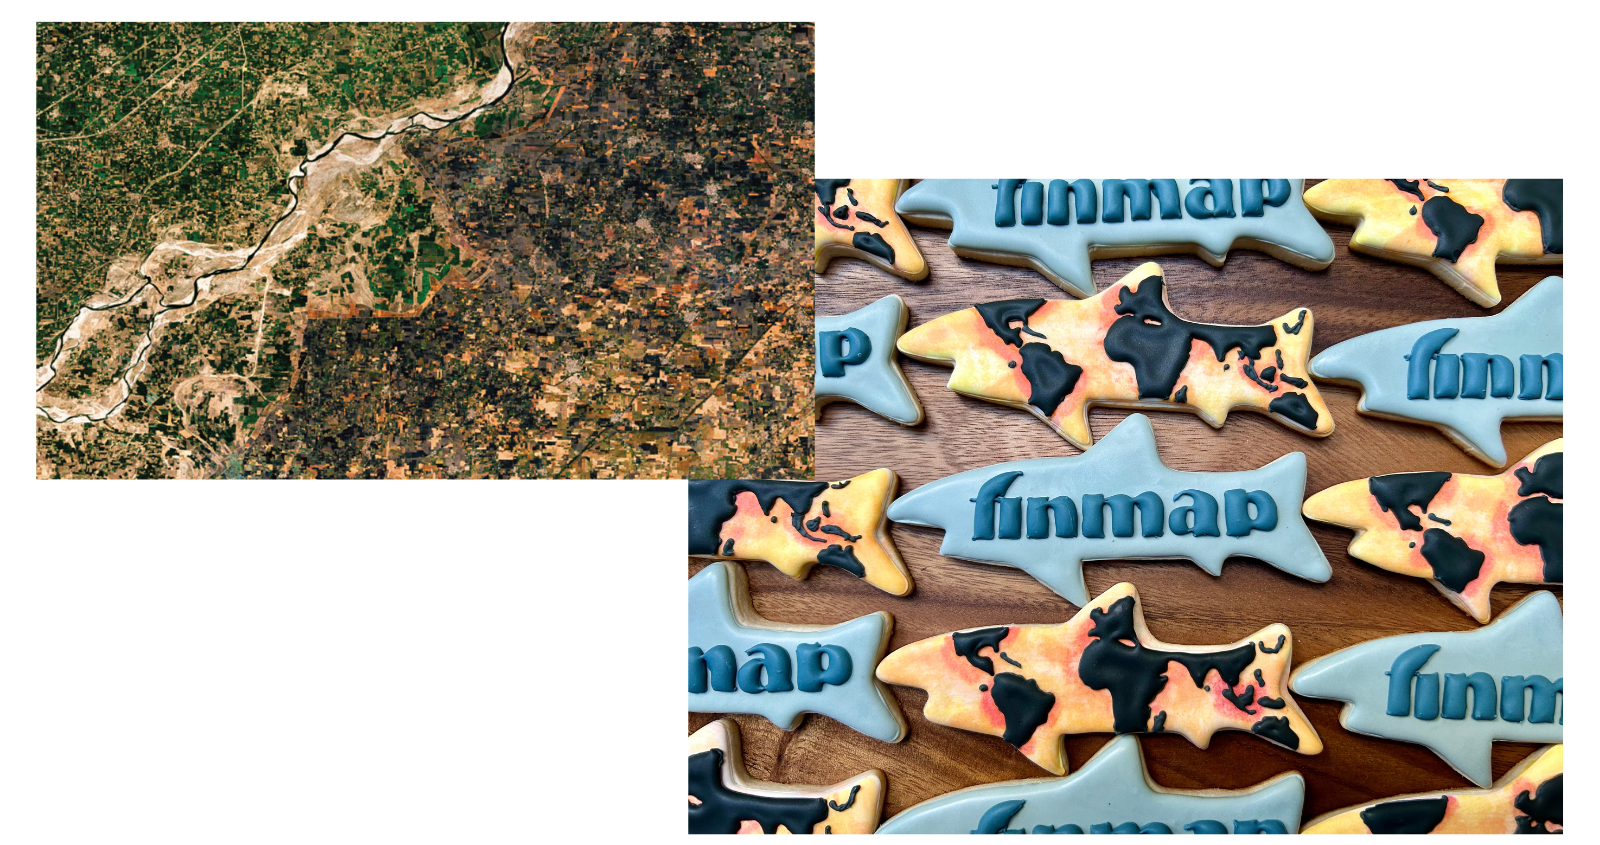 left image is satellite of border between india and pakistan; right image is finmap shark cookies